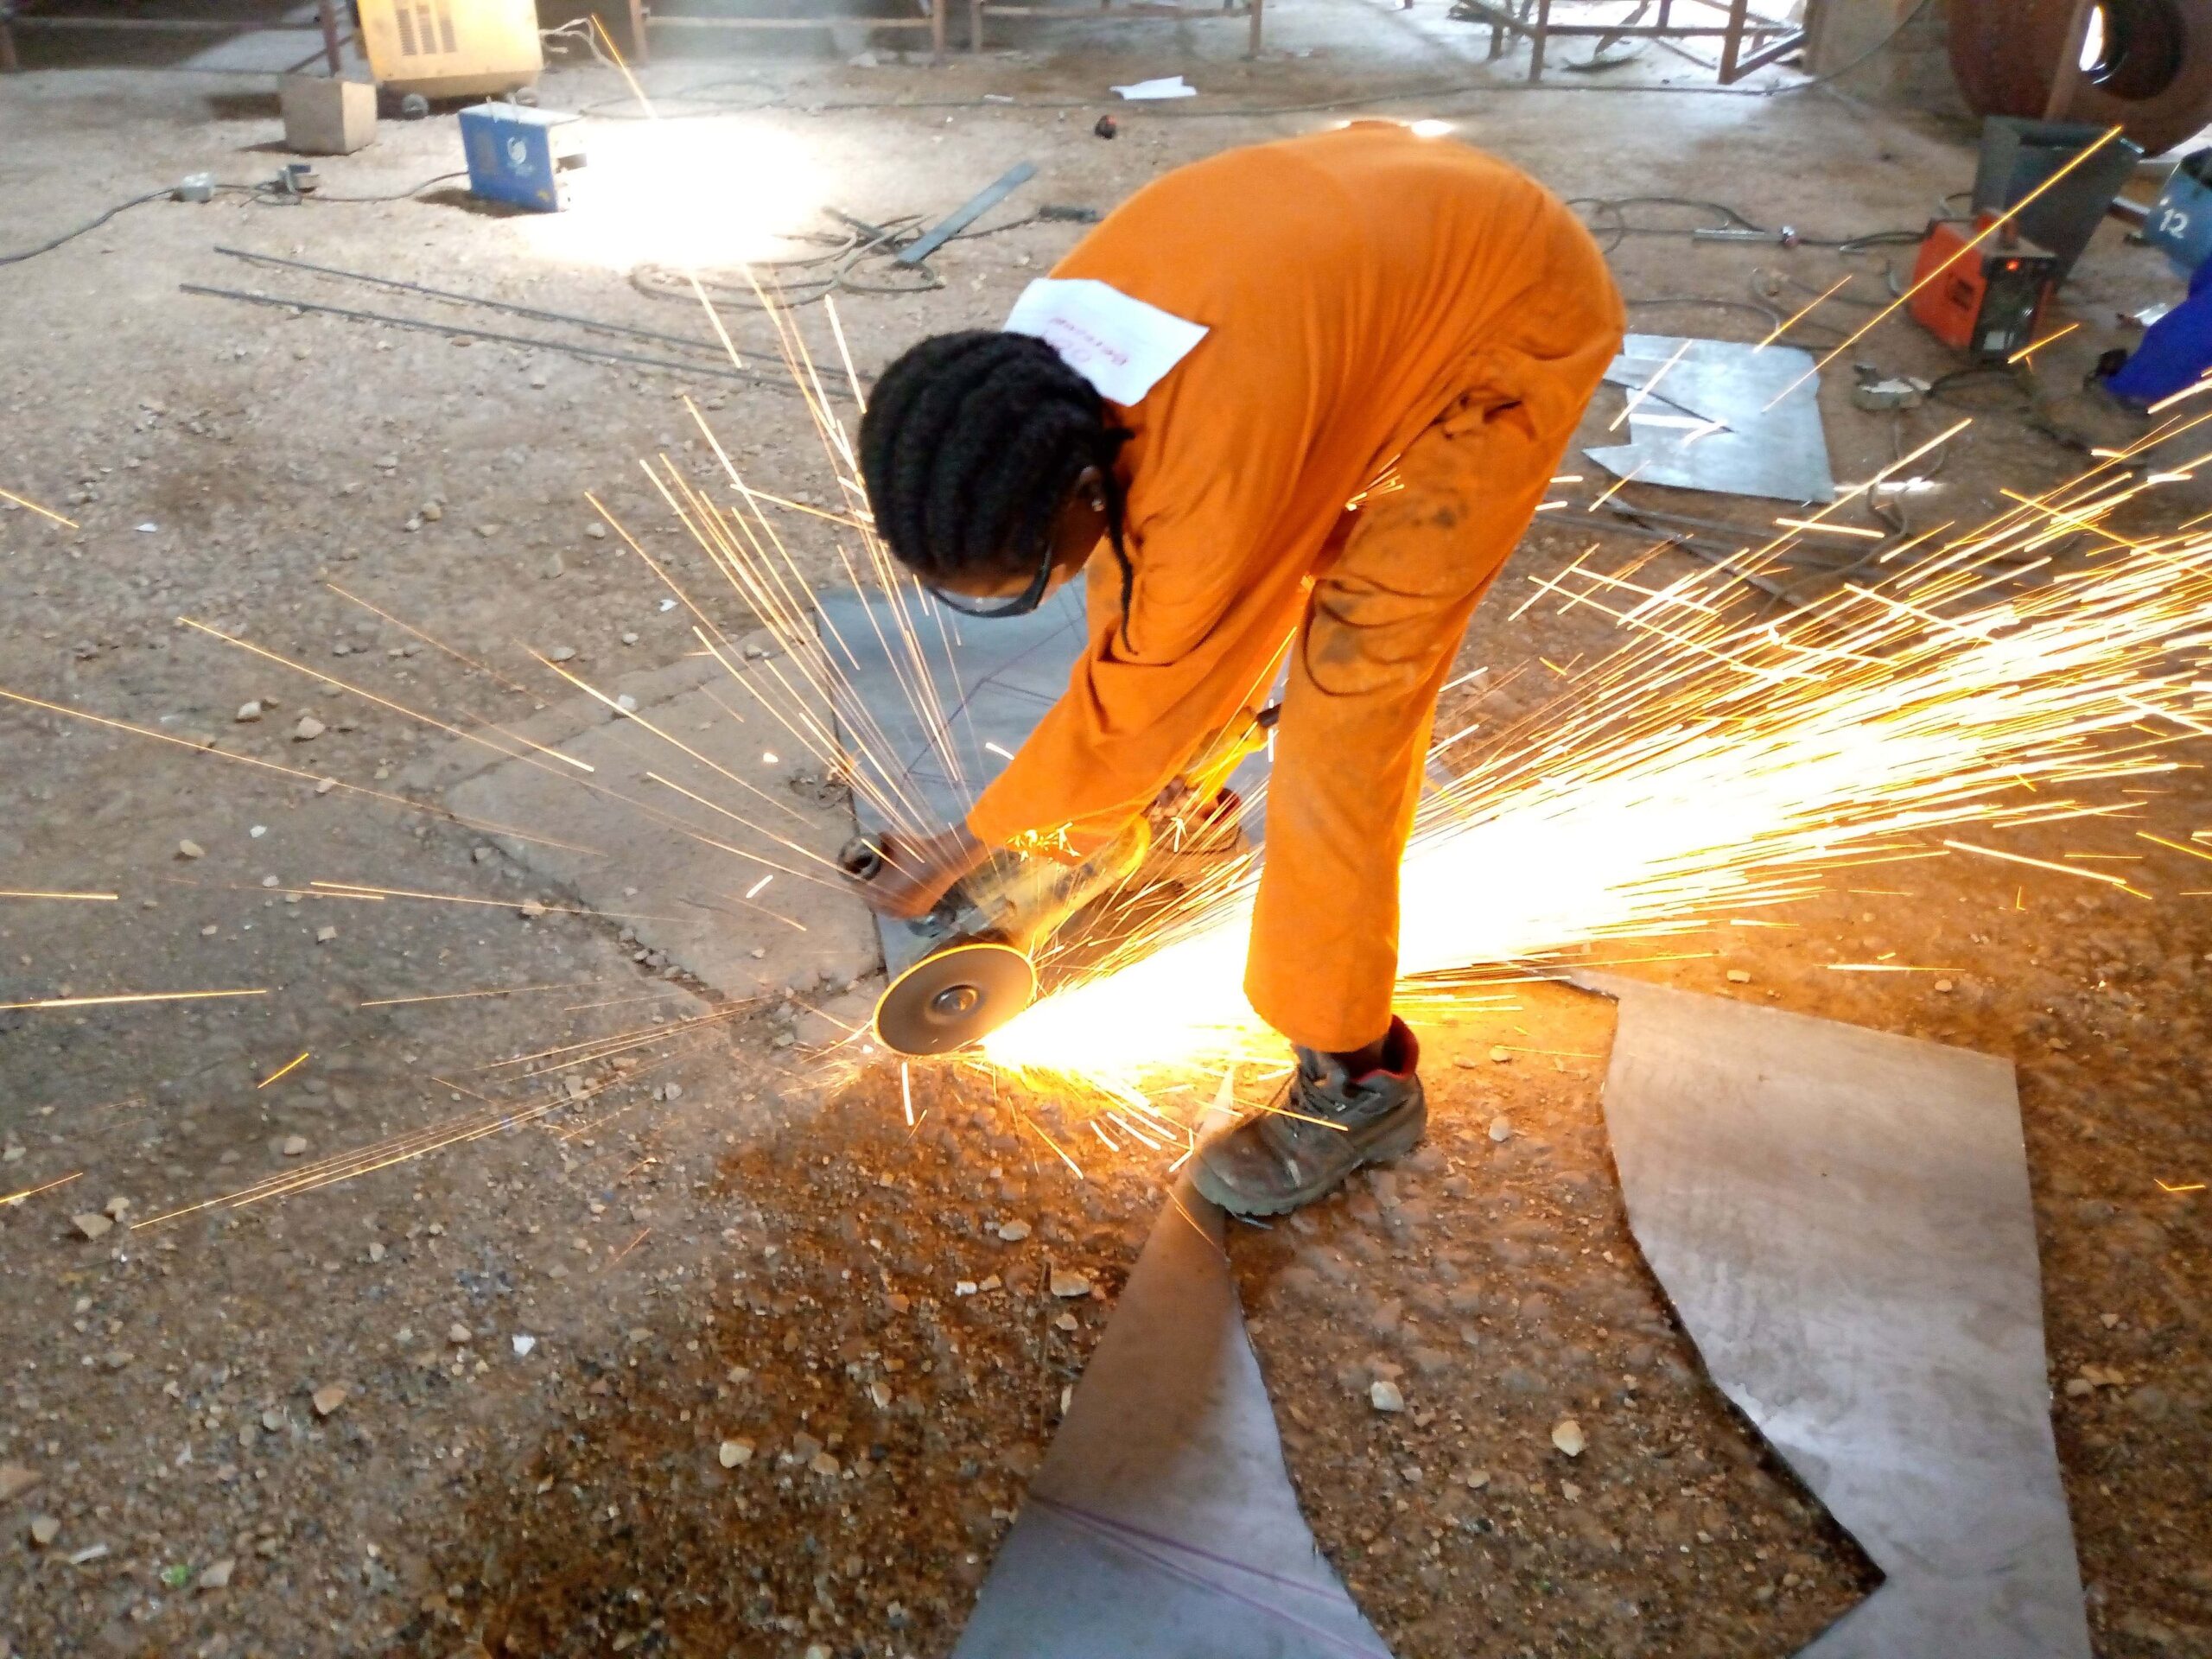 A girl wearing orange overalls, using an angle grinder on a piece of metal with sparks flying